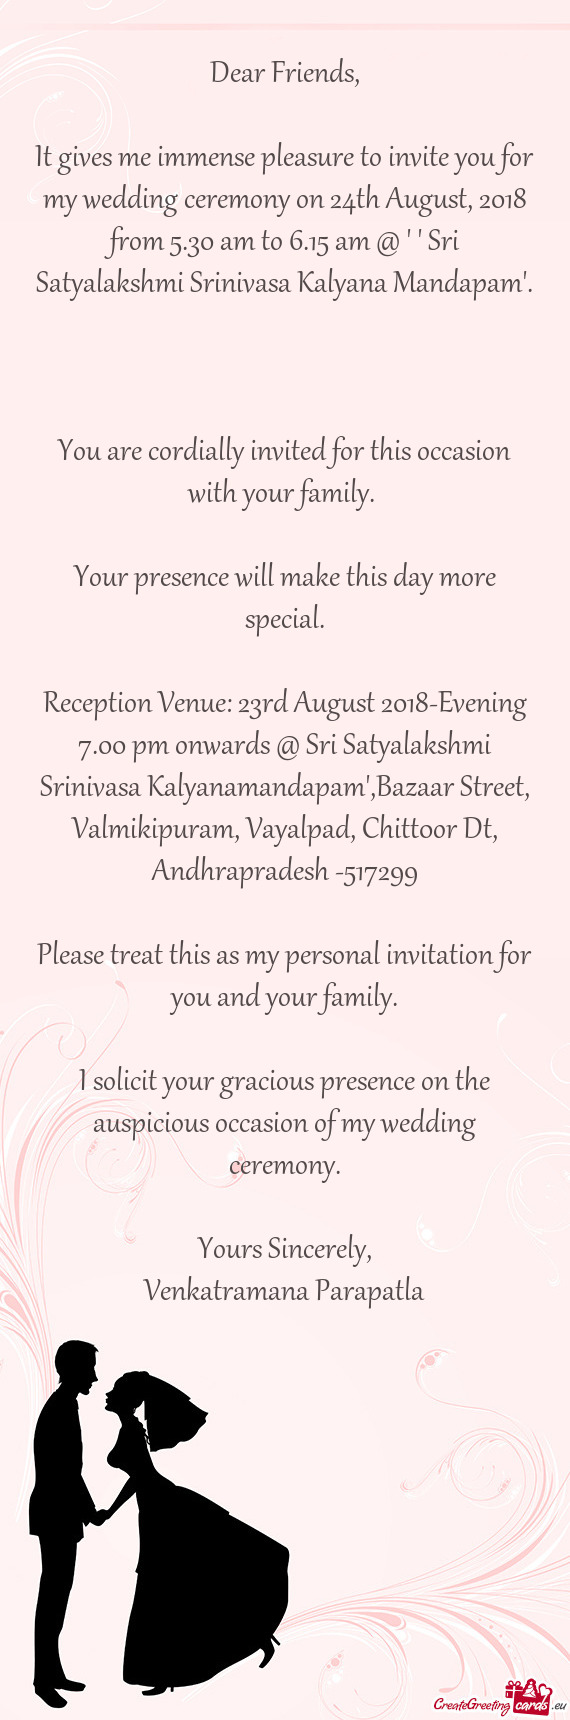 It gives me immense pleasure to invite you for my wedding ceremony on 24th August, 2018 from 5.30 am